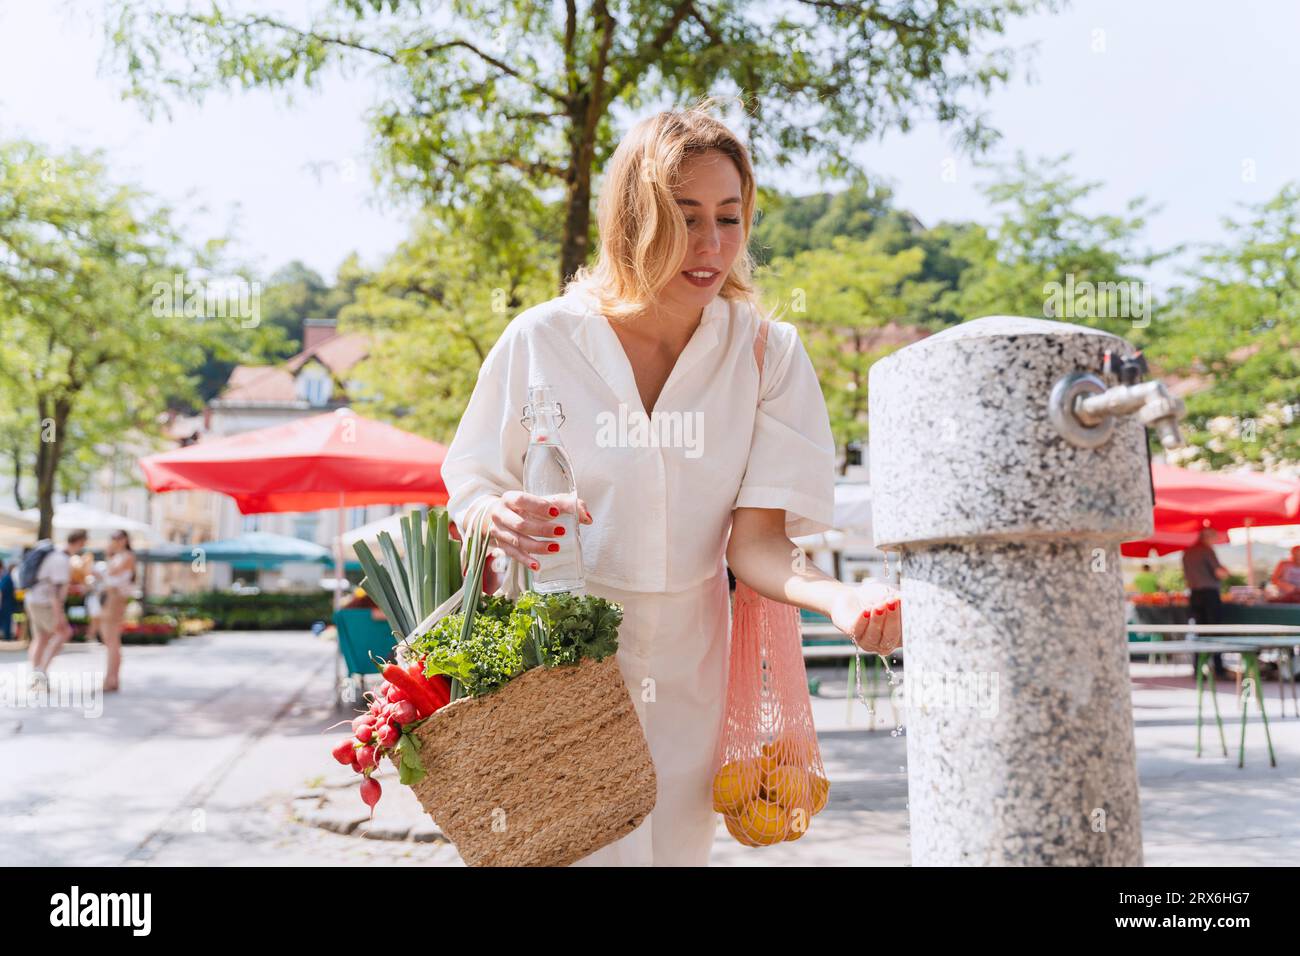 Woman with bags of groceries fetching water from drinking fountain Stock Photo